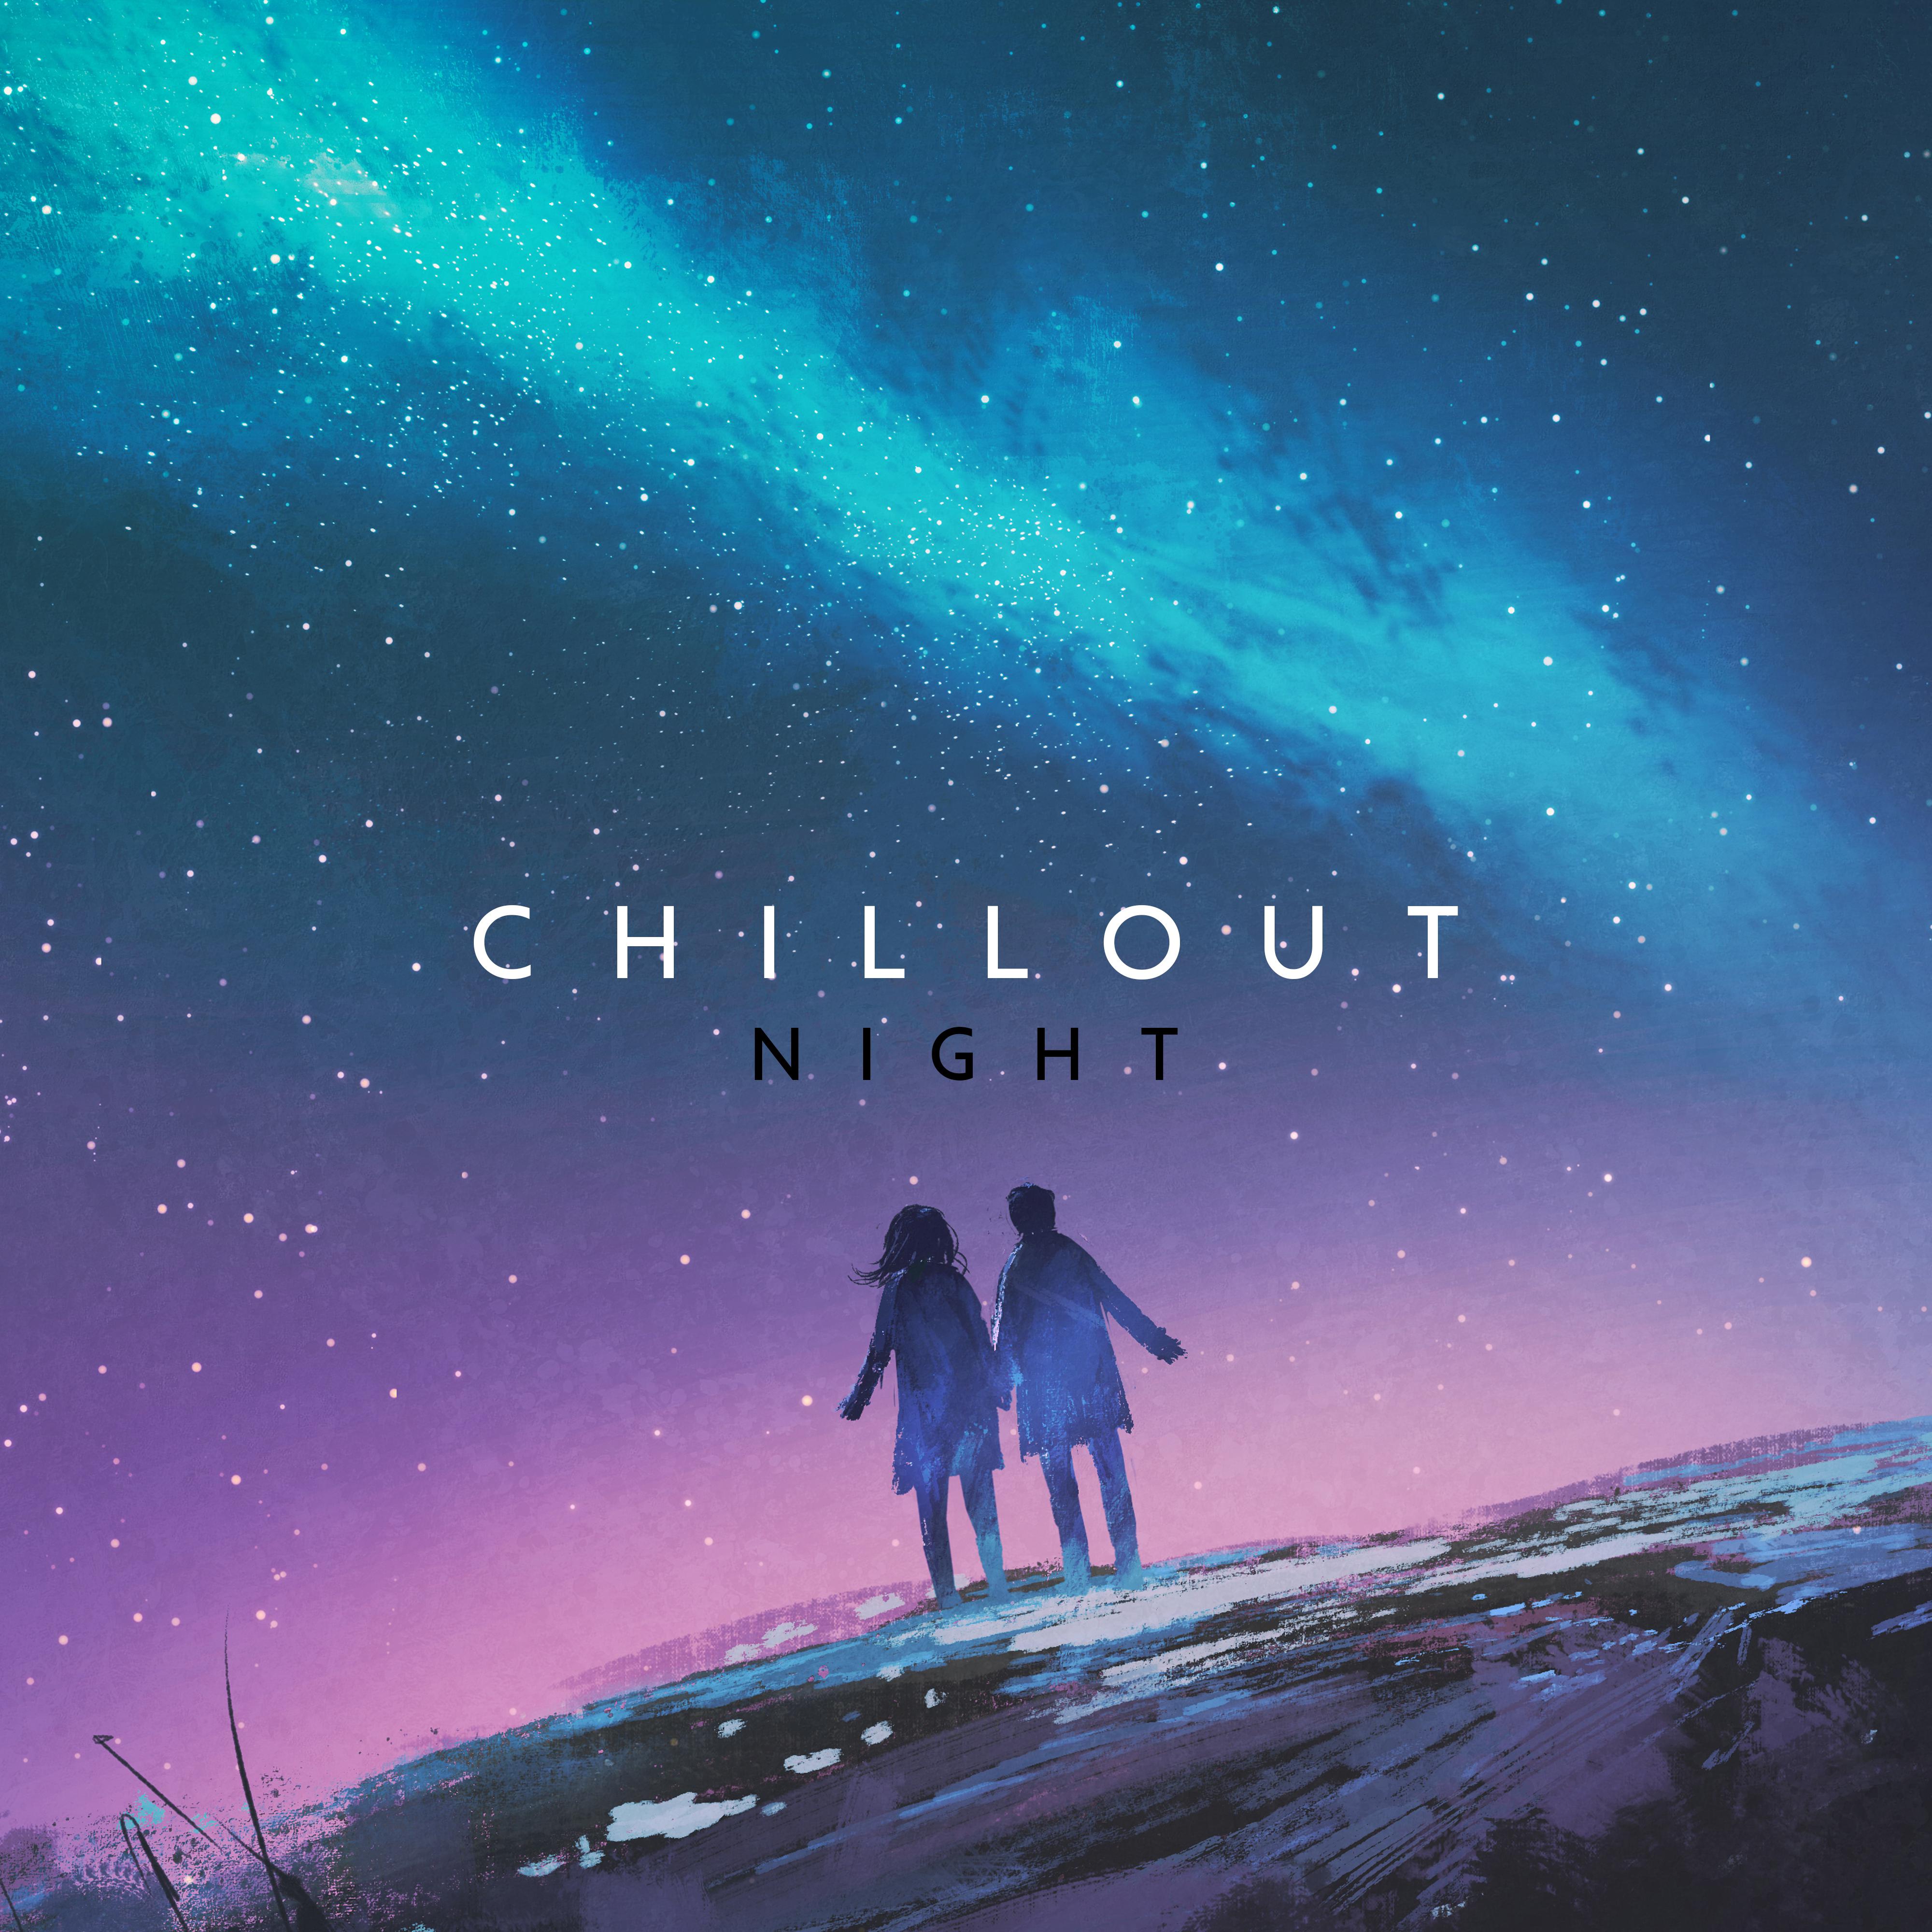 Chillout Night – Music for Reduce Stress, Soft Relaxing Beats, Relax Zone, Chillout Lounge, Calming Chillout